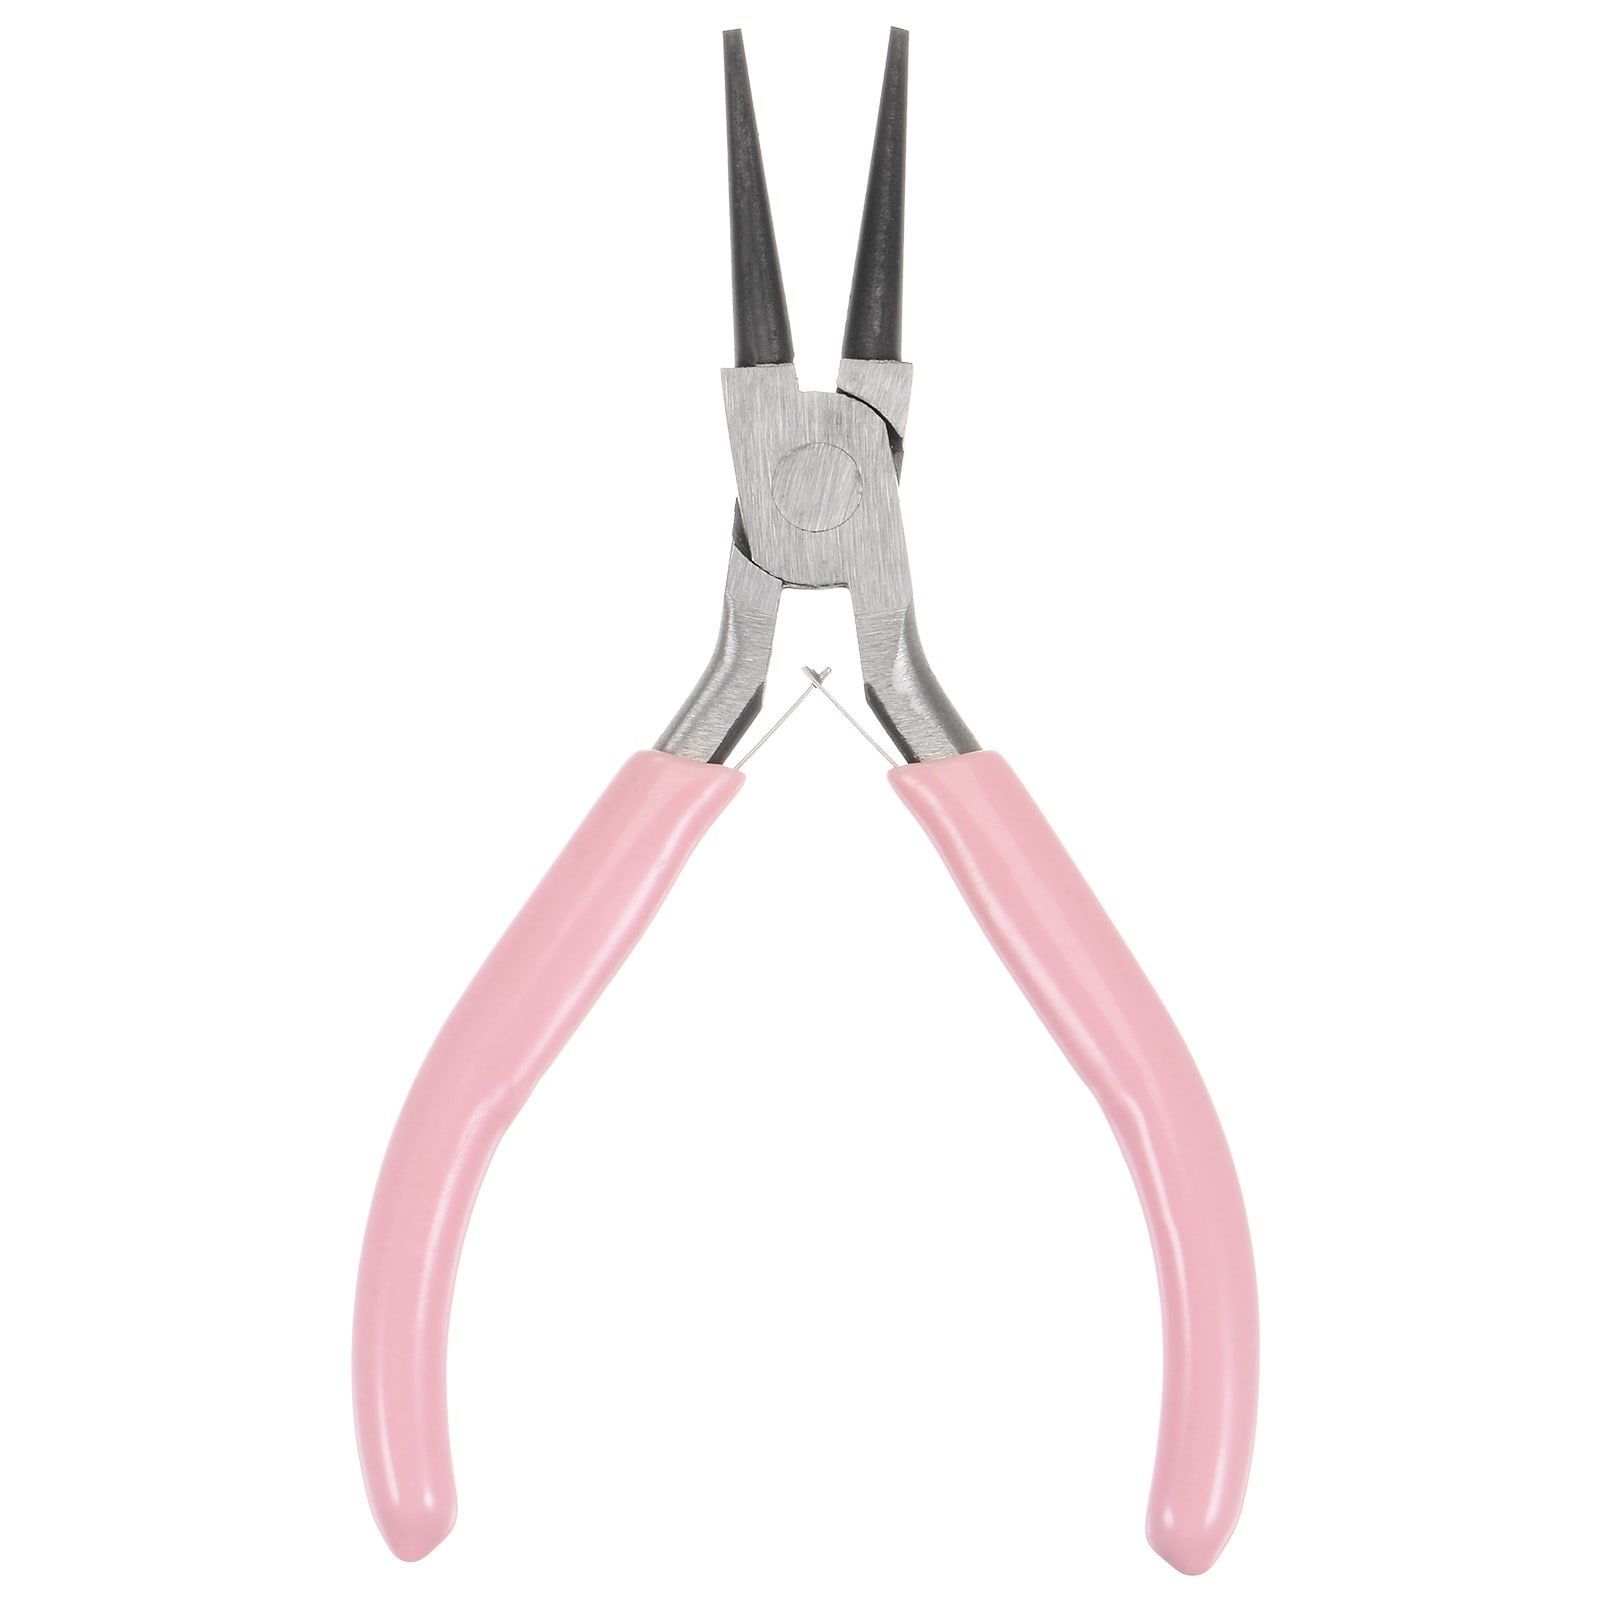 Mini Needle Nose Pliers 4.5 Mini Flat Jaw Precision Plier with Pink Handle